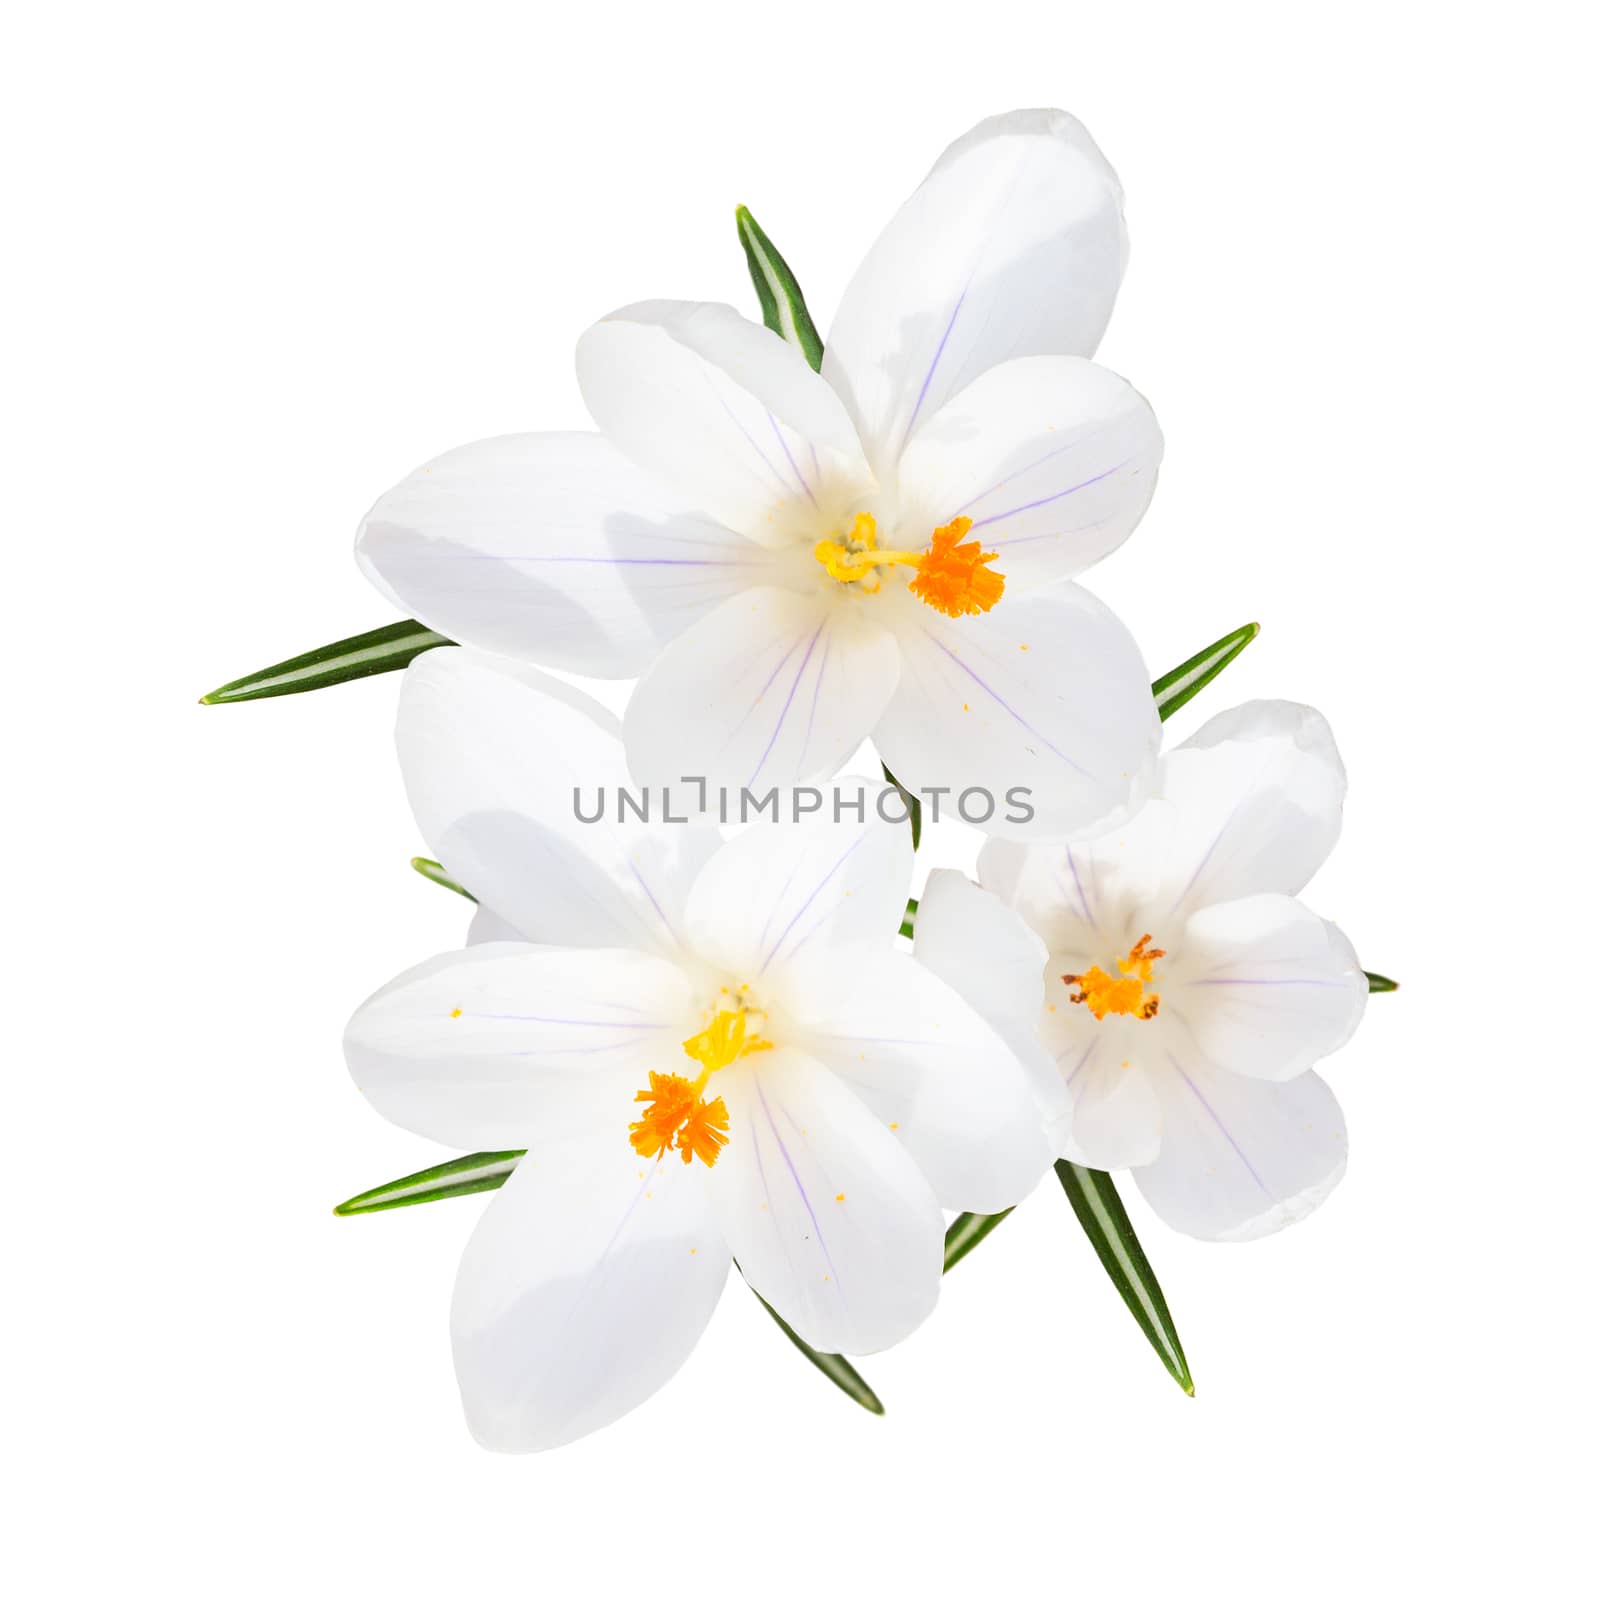 Spring blooming fragile crocus white sunlight flowers with leafs top view isolated